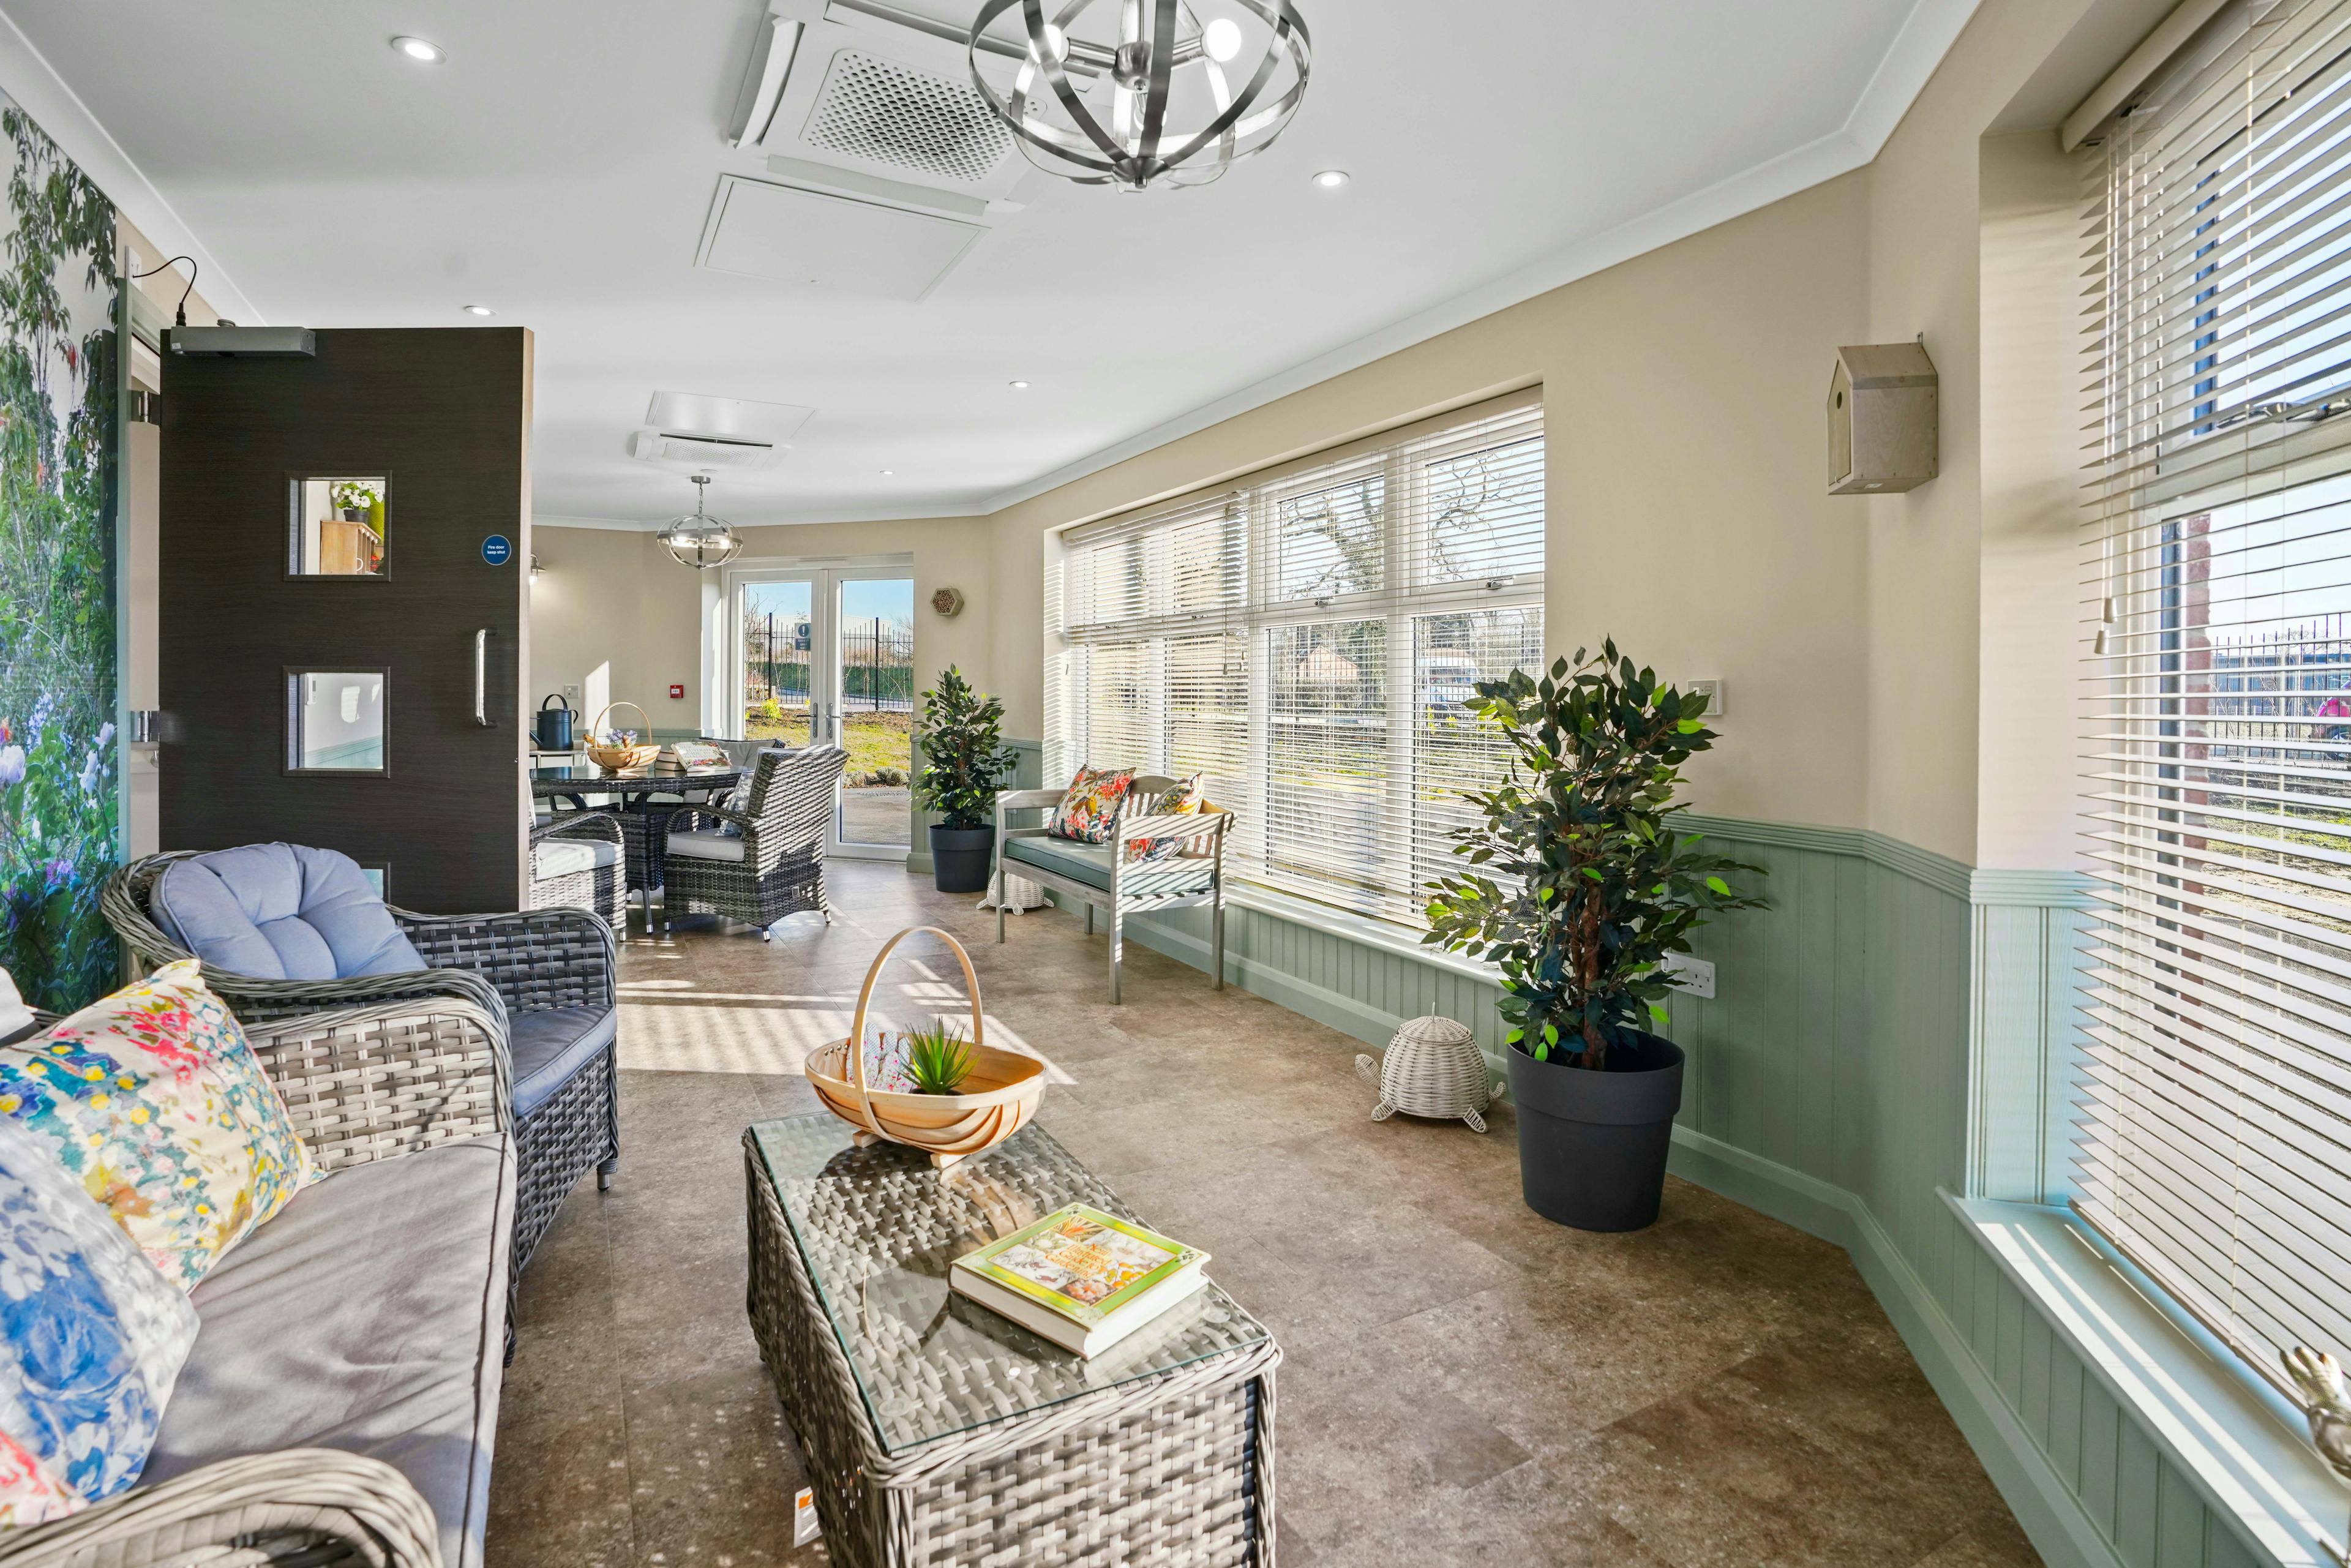 Garden room of Toray Pines care home in Woodhall Spa, Lincolnshire